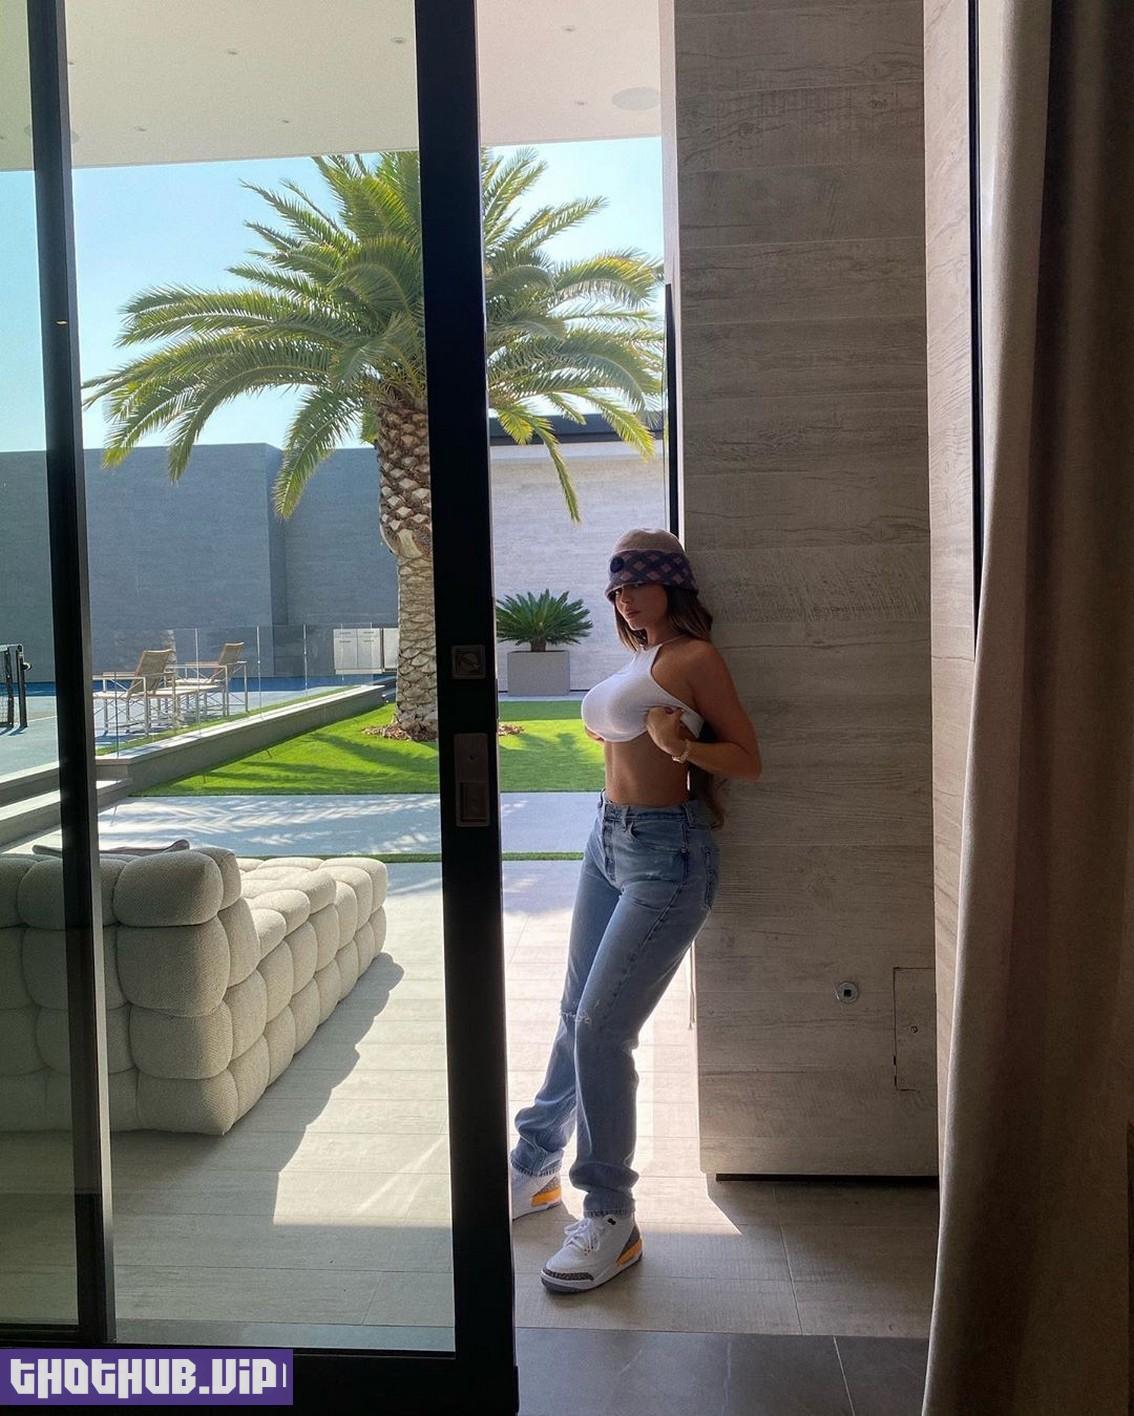 Kylie Jenner Showed Off Big Tits In A White Top